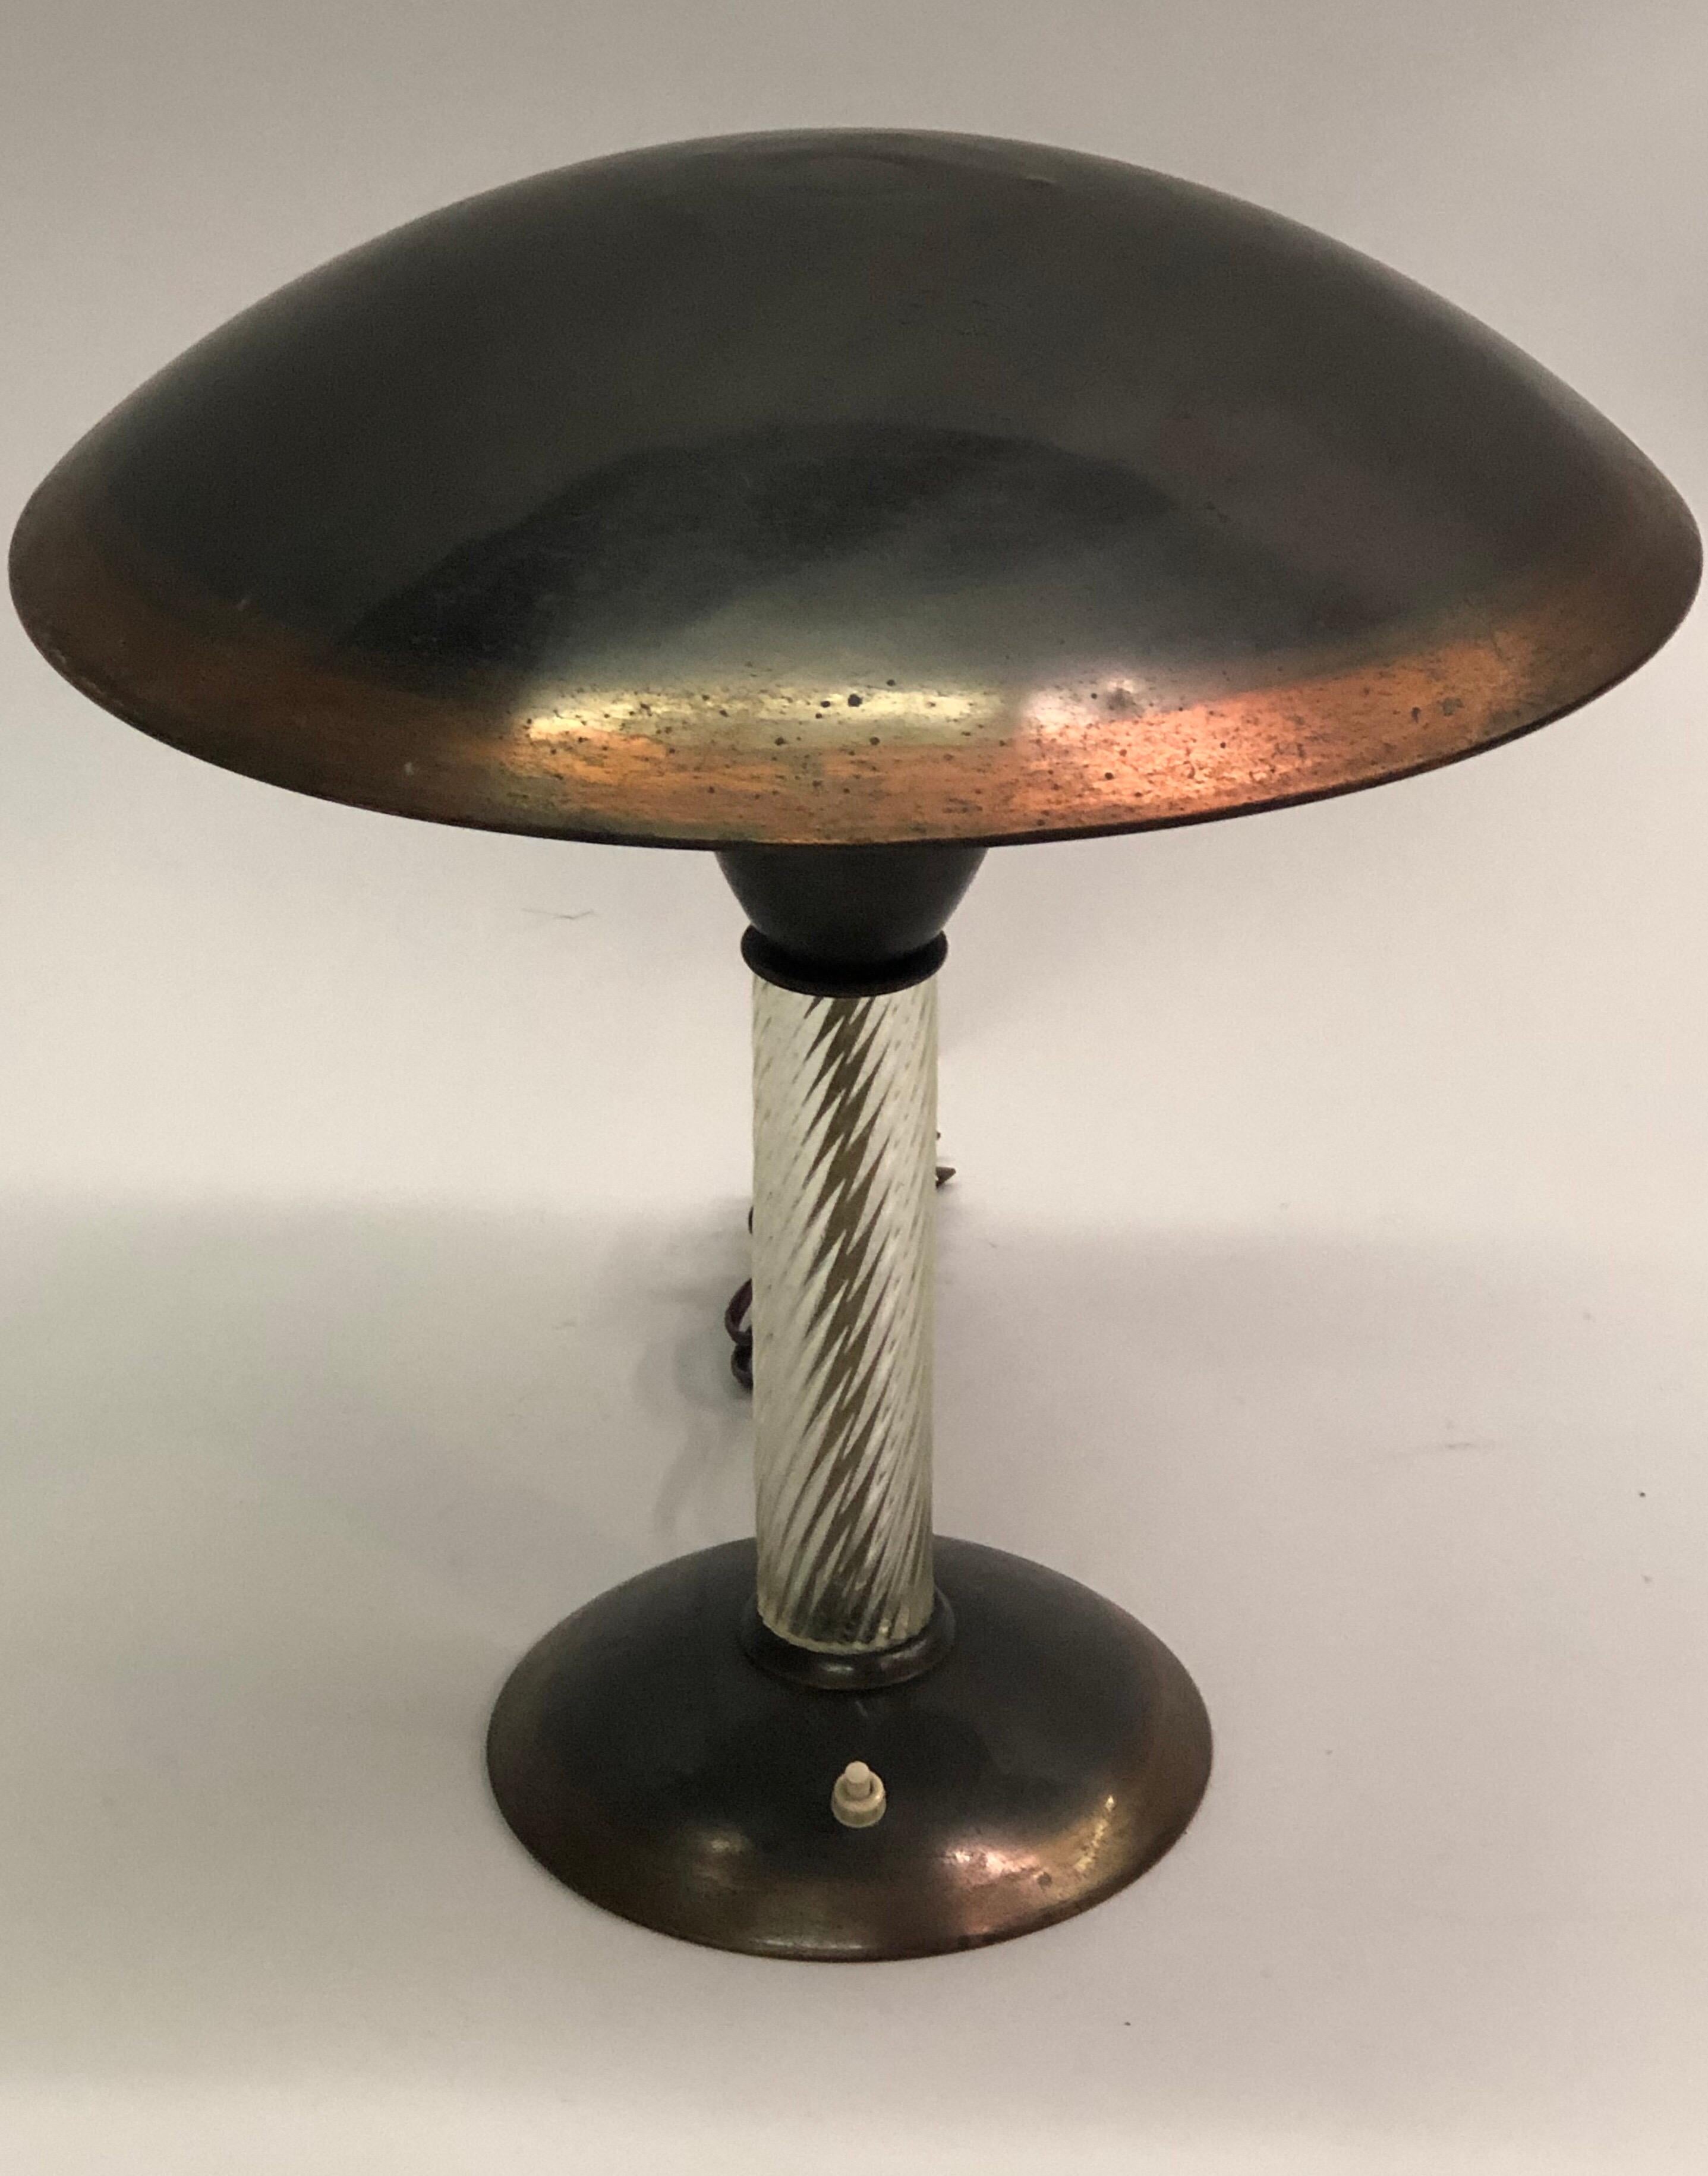 Italian Art Deco / Midcentury Modern Table / Desk Lamp by Siemens & Venini Glass In Good Condition For Sale In New York, NY